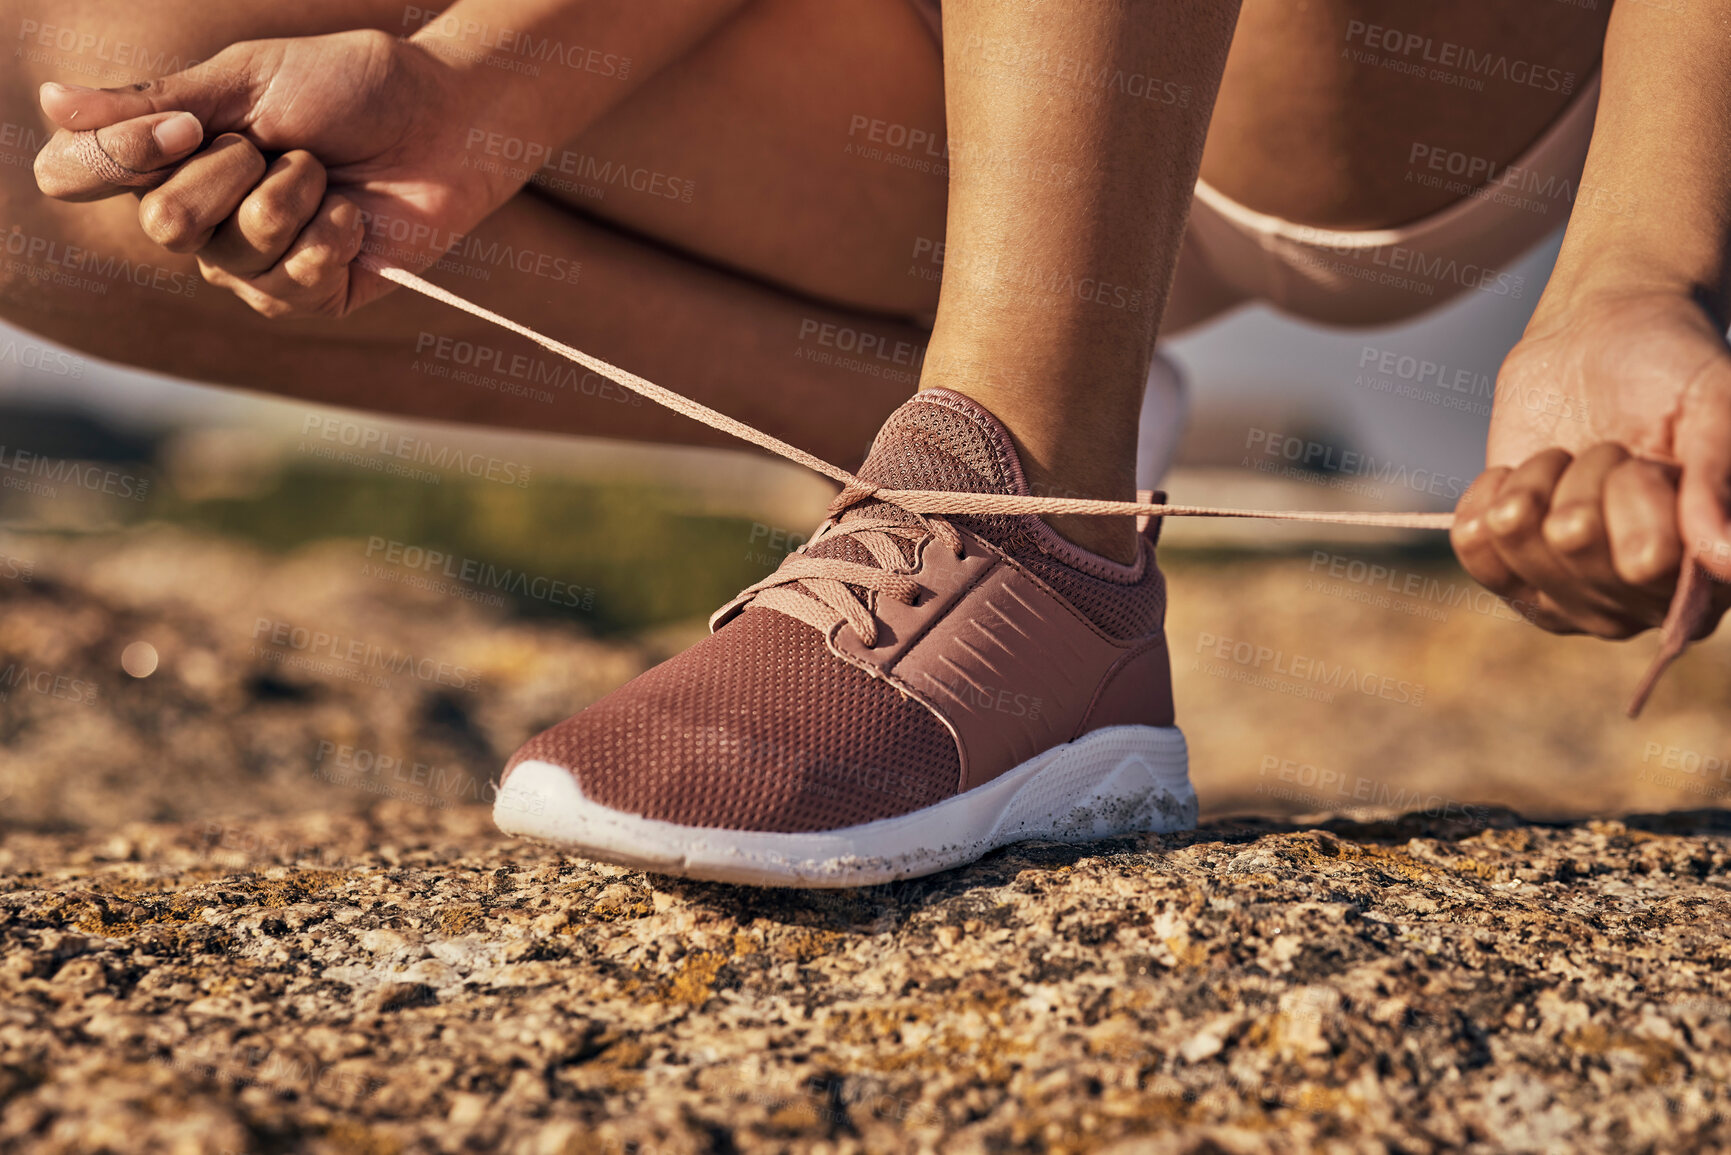 Buy stock photo Fitness, hands and tie shoes in nature to start running, workout or training. Sports, wellness and female or woman tying sneaker laces or footwear to get ready for exercising, cardio or jog outdoors.